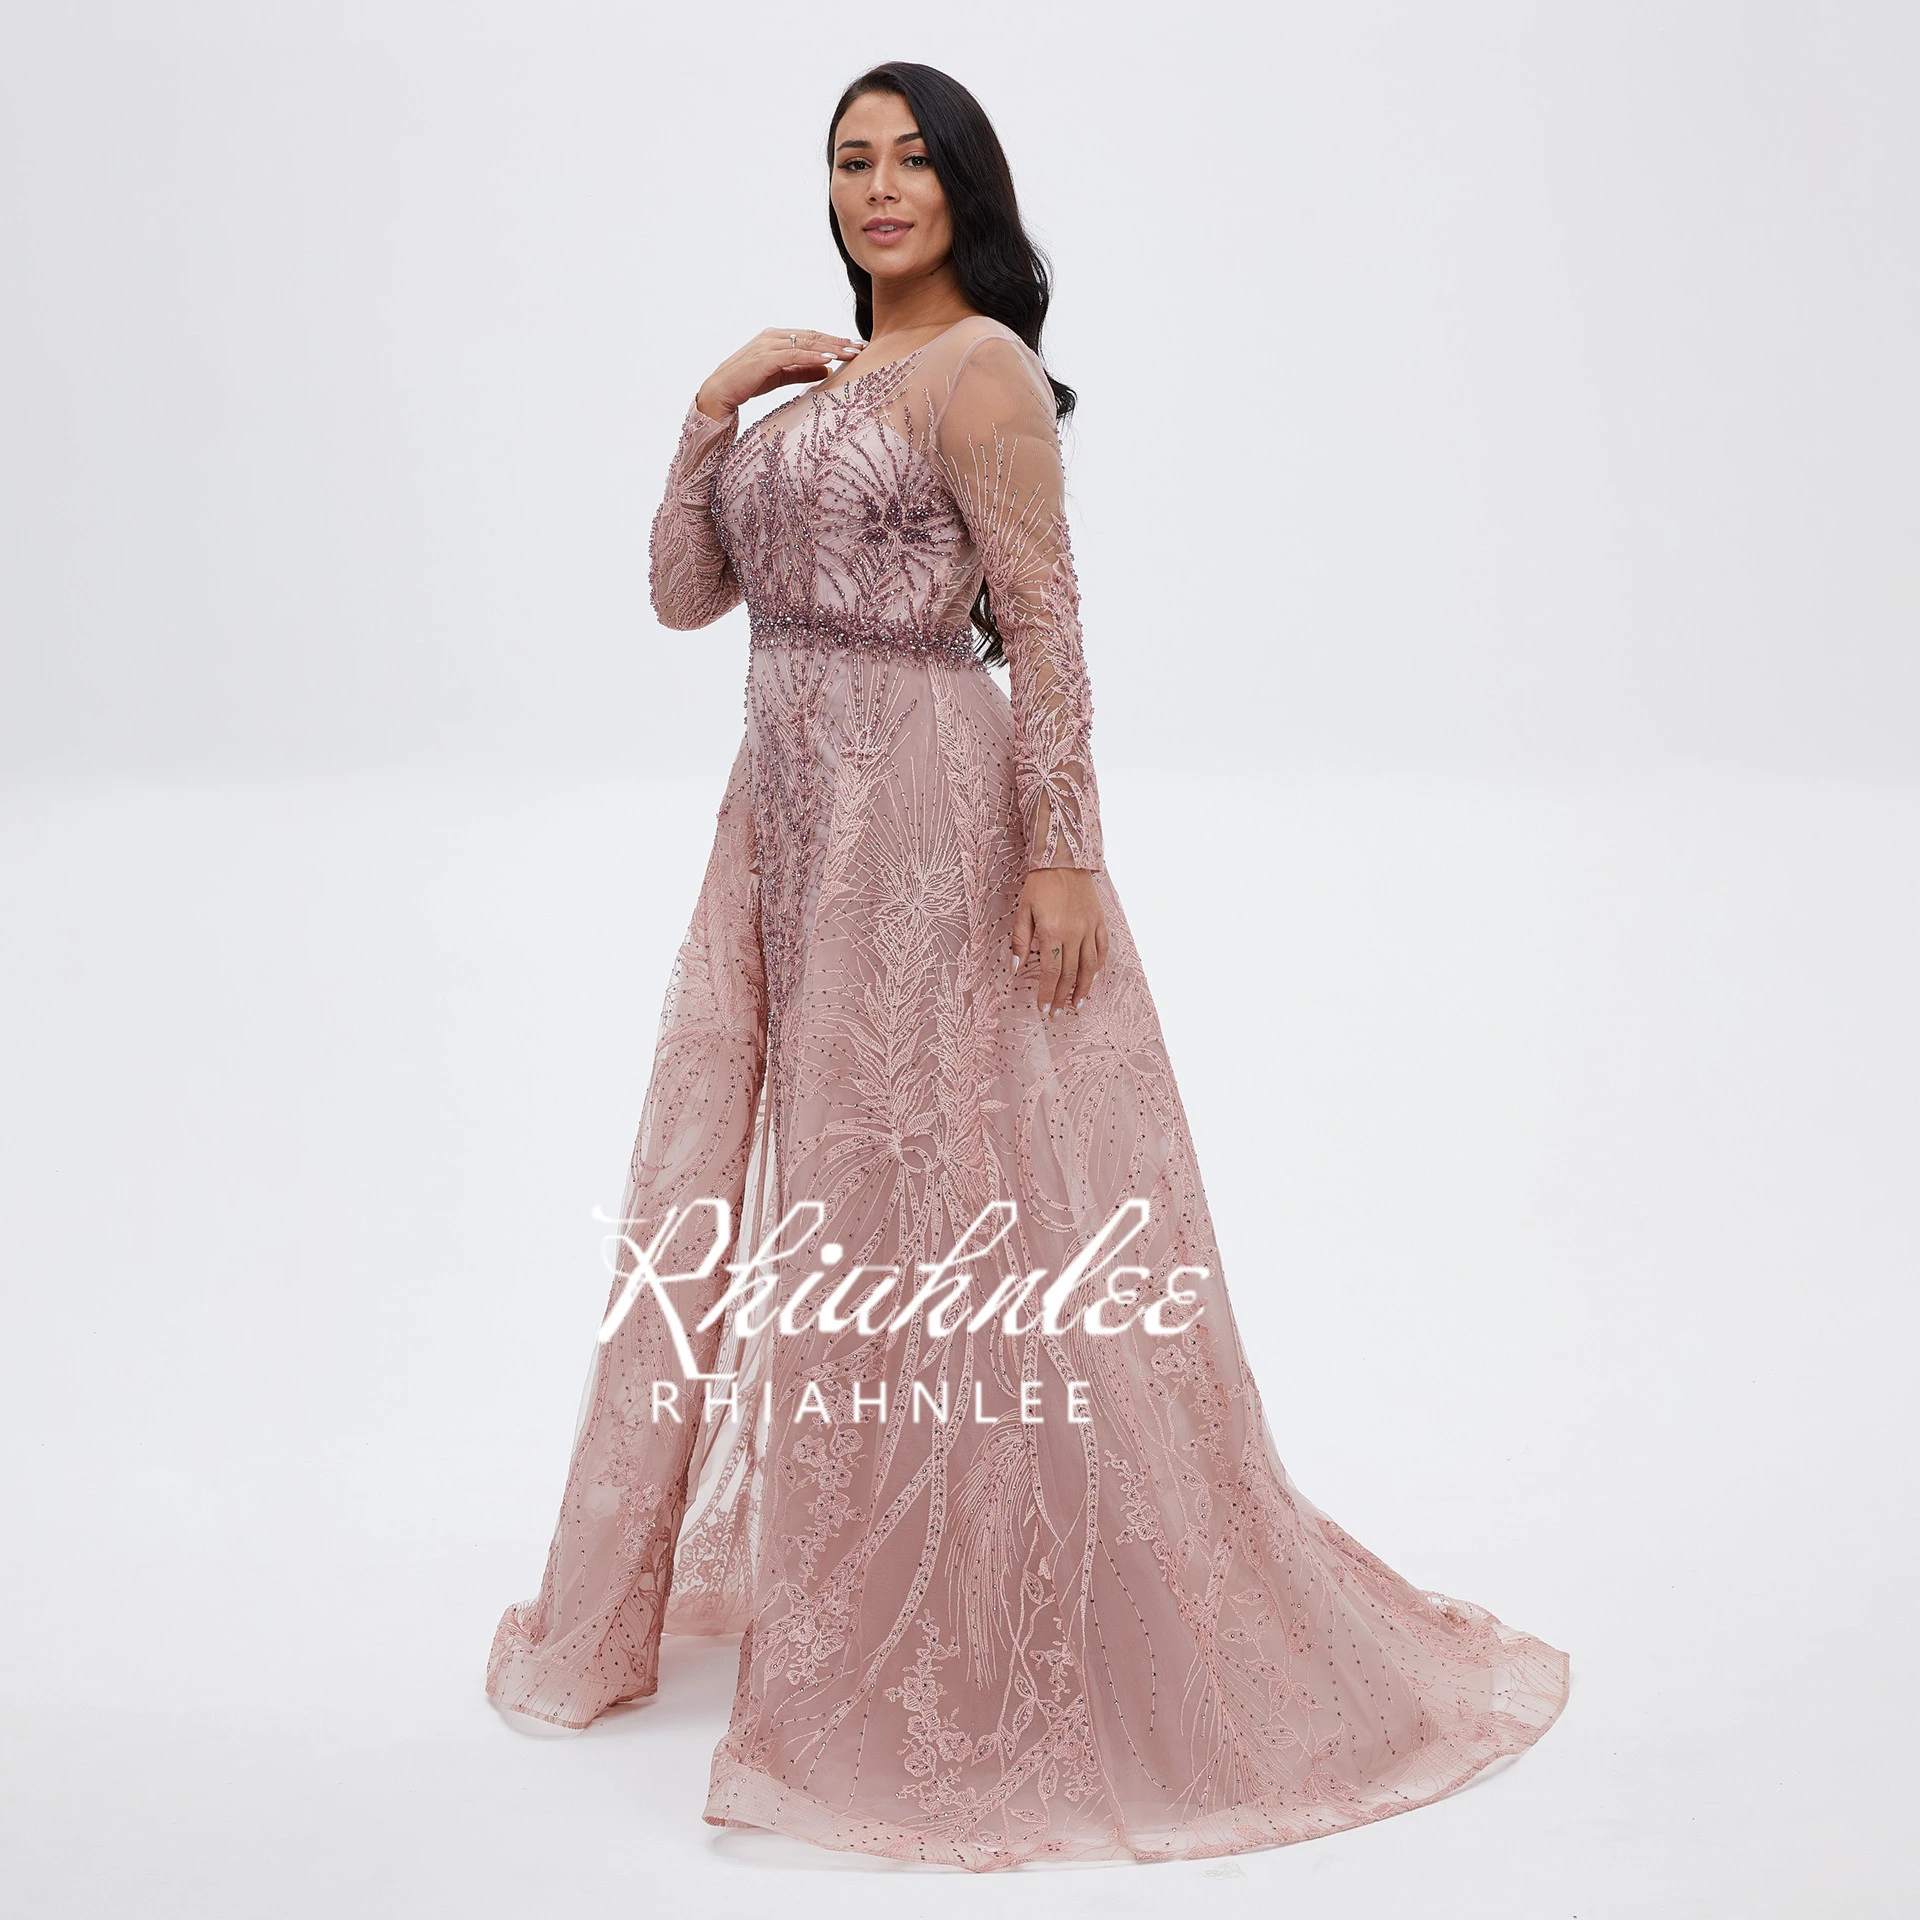 evening dresses for women Rhiahnlee Dubai Long Sleeve Pink Evening Dresses Scoop Neckline Lace Beading Floor Length Evening Gowns RA0026 evening dresses with sleeves